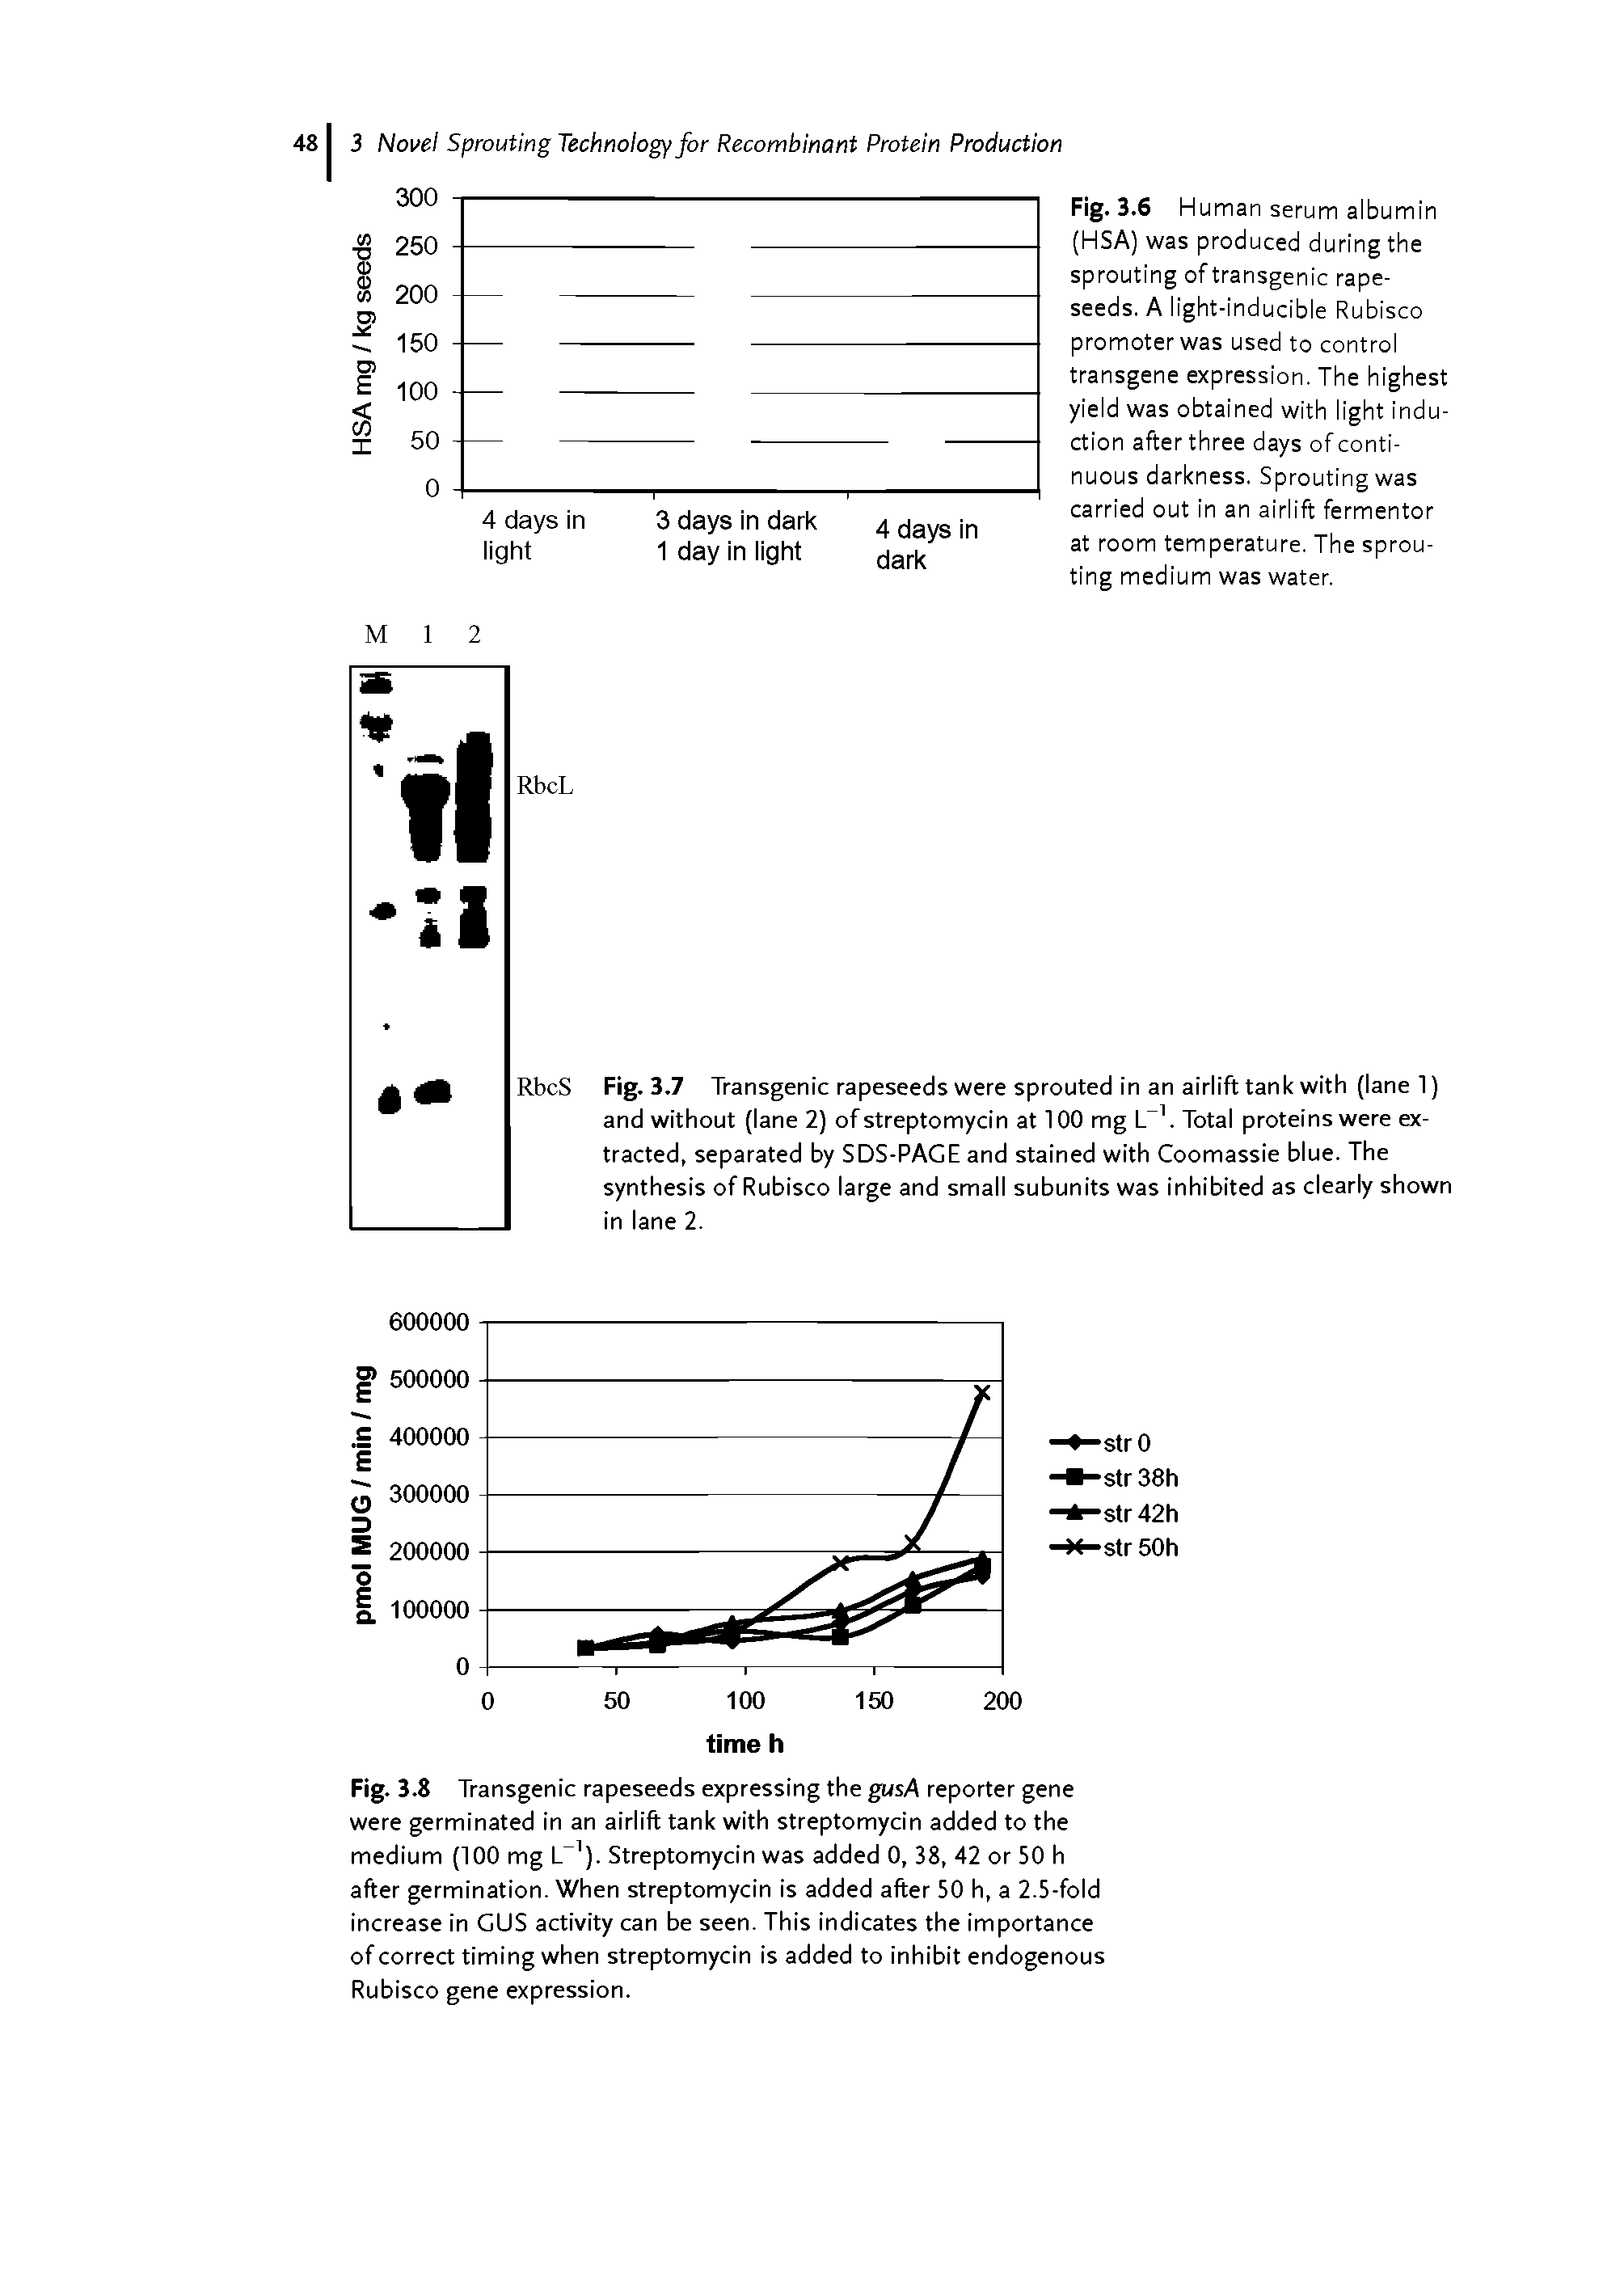 Fig. 3.6 Human serum albumin (HSA) was produced during the sprouting of transgenic rape-seeds. A light-inducible Rubisco promoter was used to control transgene expression. The highest yield was obtained with light induction after three days of continuous darkness. Sprouting was carried out in an airlift fermentor at room temperature. The sprouting medium was water.